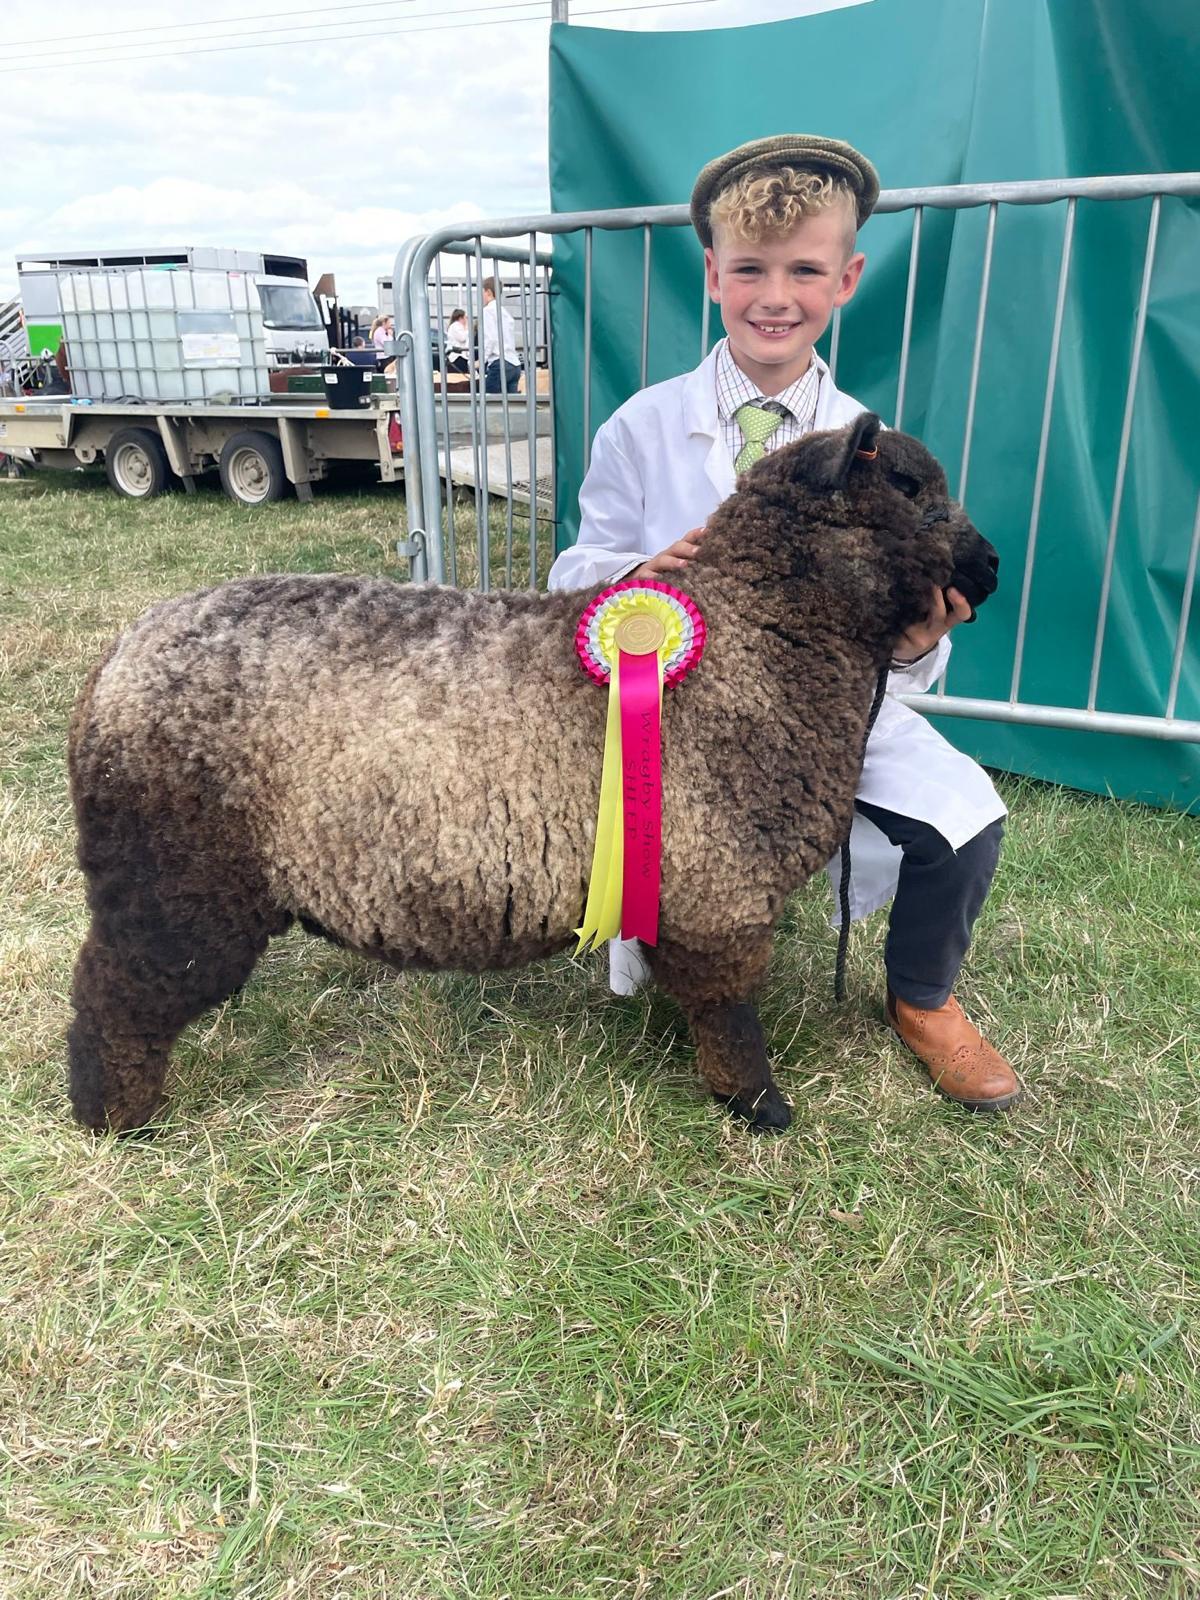 Joe at Wragby show. (SWNS)